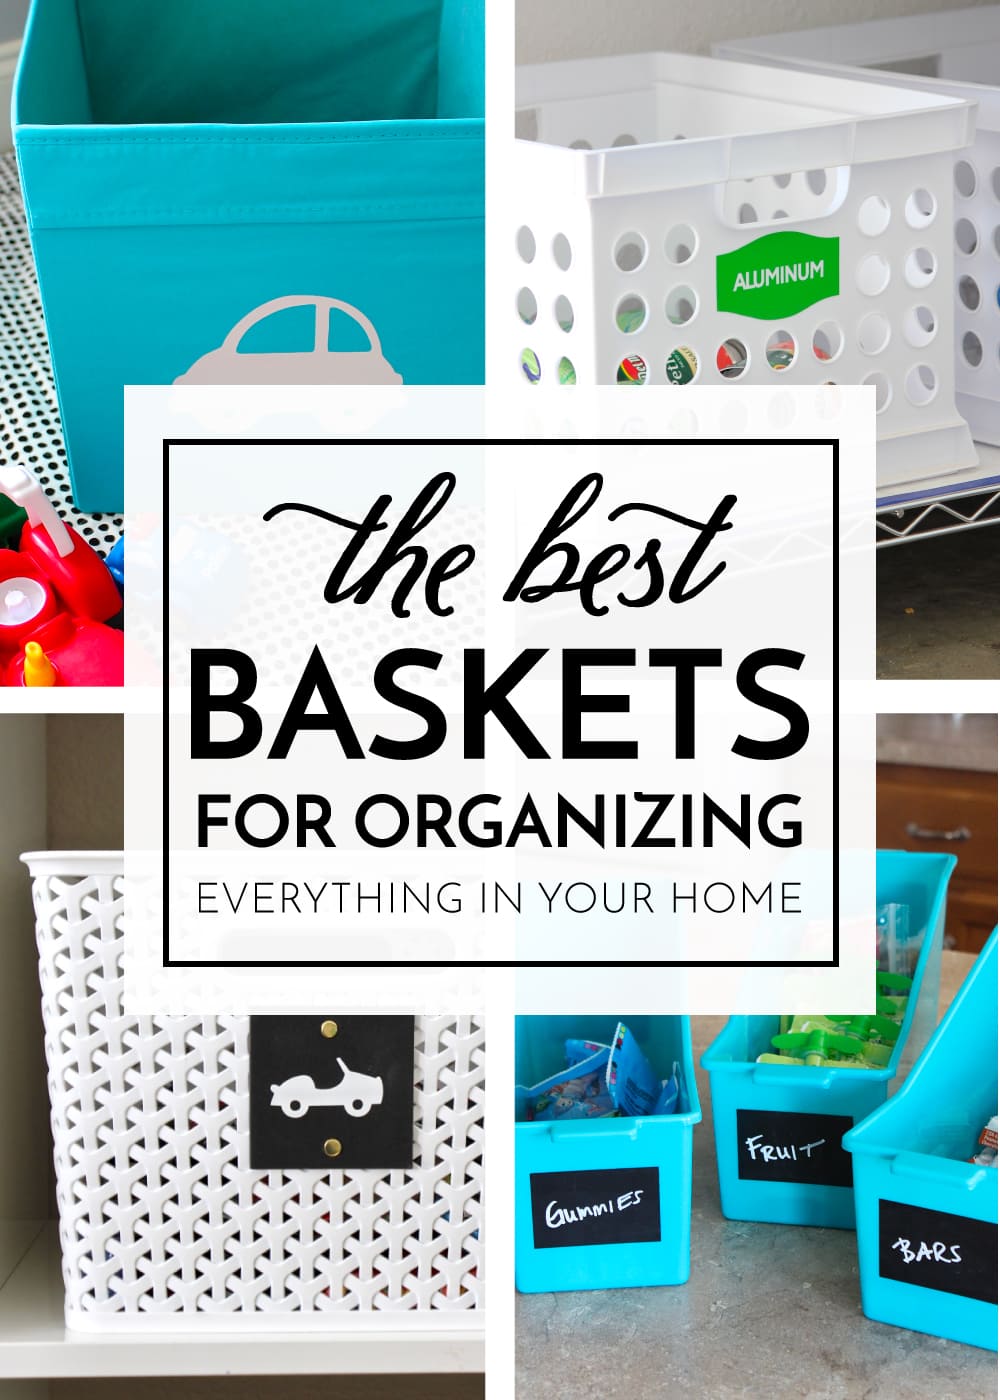 Baskets for Organizing